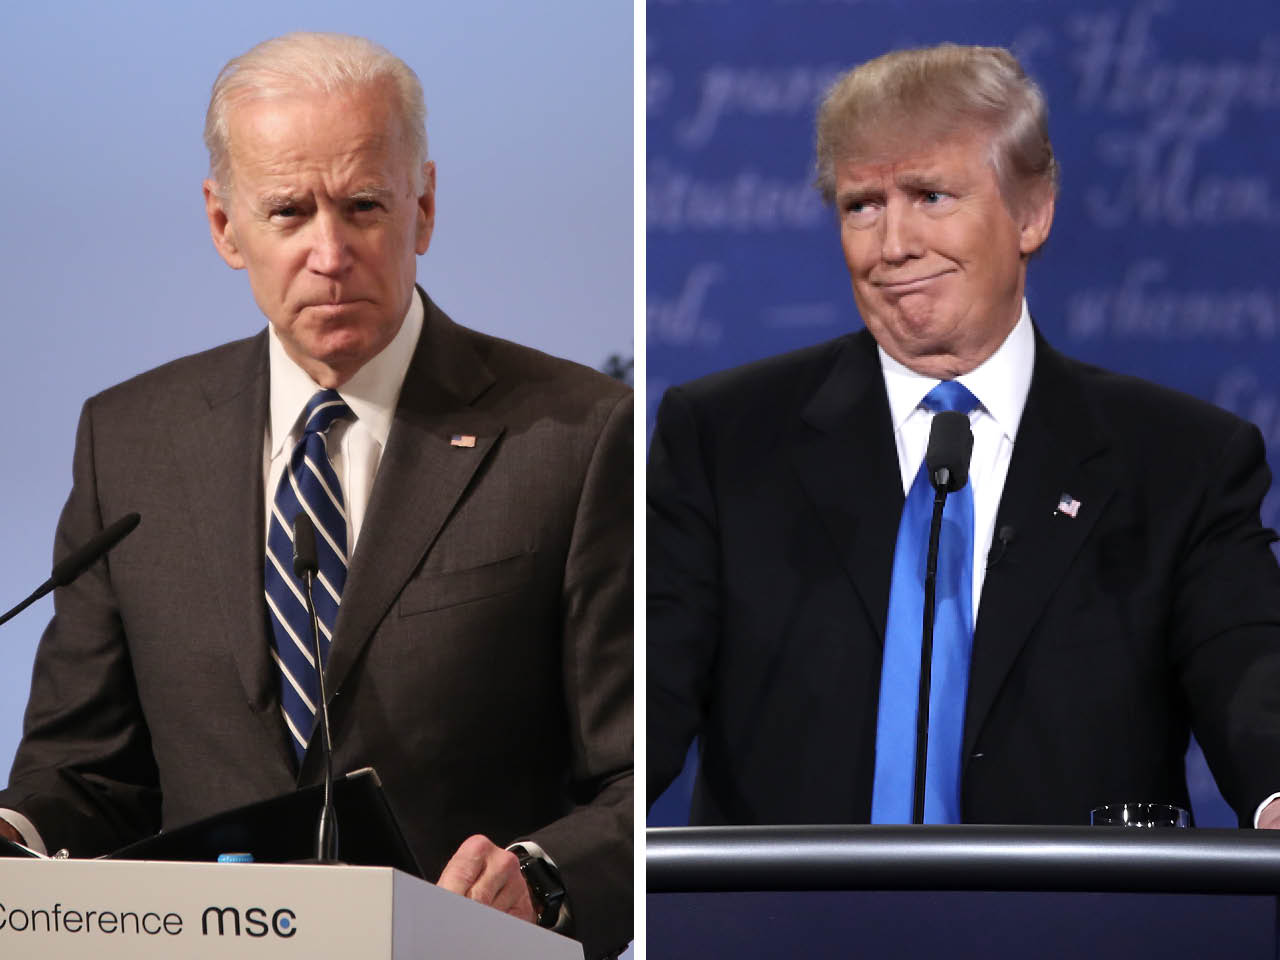 Joe Biden Says He’d ‘Beat The Hell Out Of’ Trump, Reveals How Deeply Bro Culture Has Infiltrated Politics